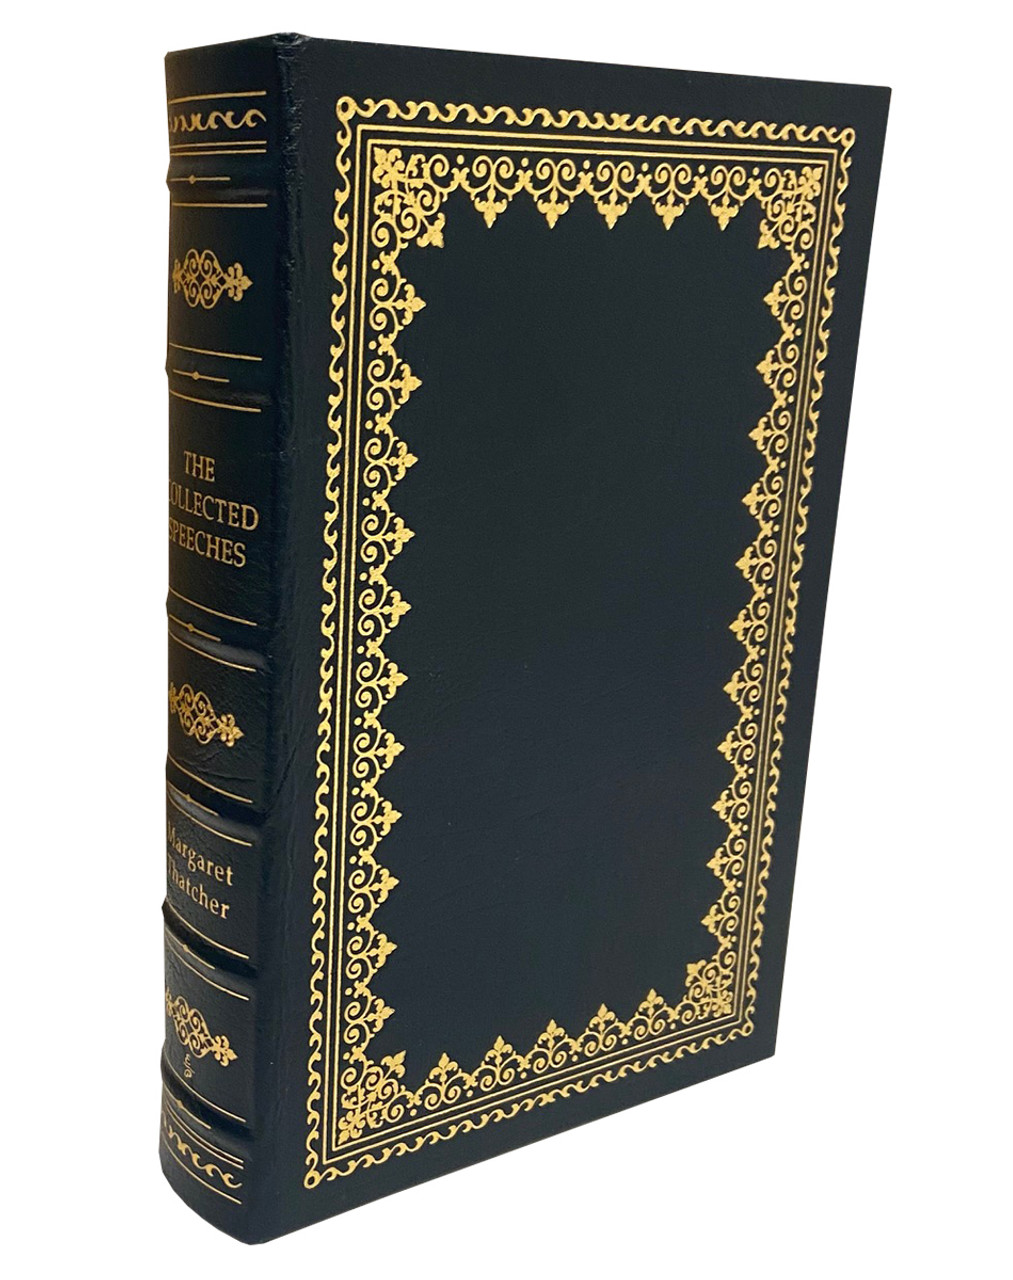 Lady Margaret Thatcher "The Collected Speeches" Leather Bound Limited Edition, Signed First Edition No. 250 of 2,000 w/COA